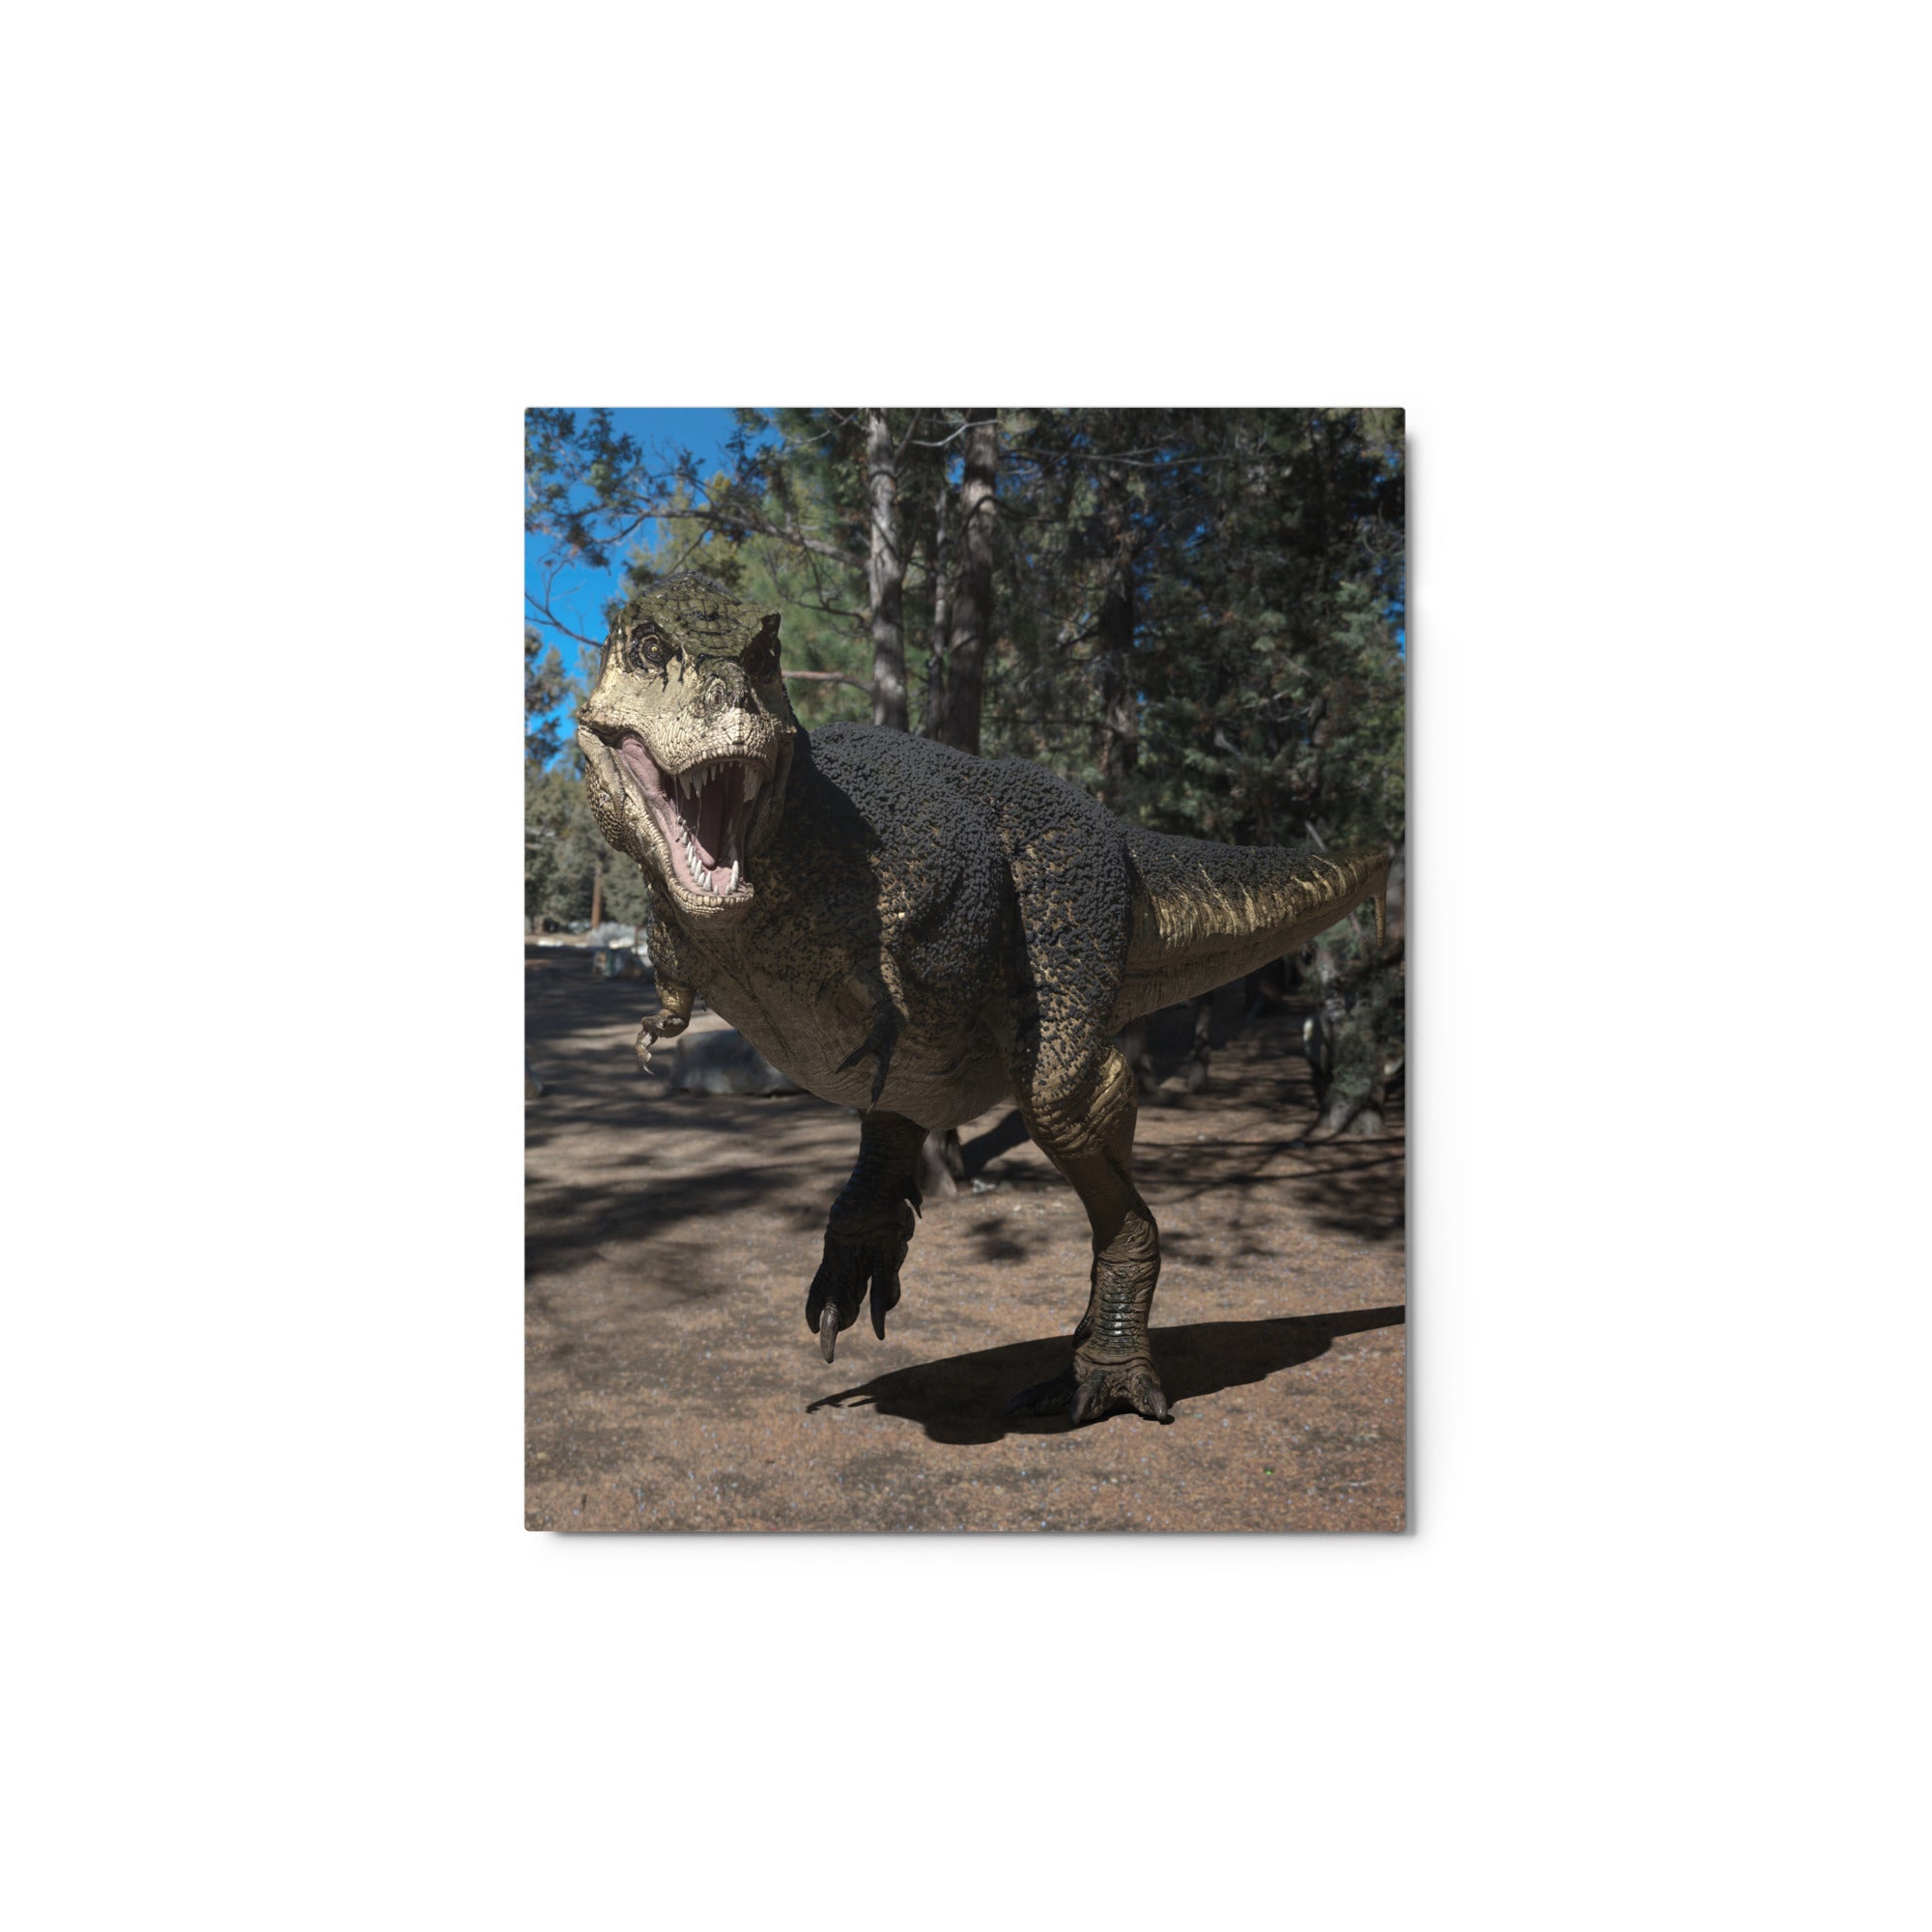 Metal Prints | North American T-Rex with Feathers